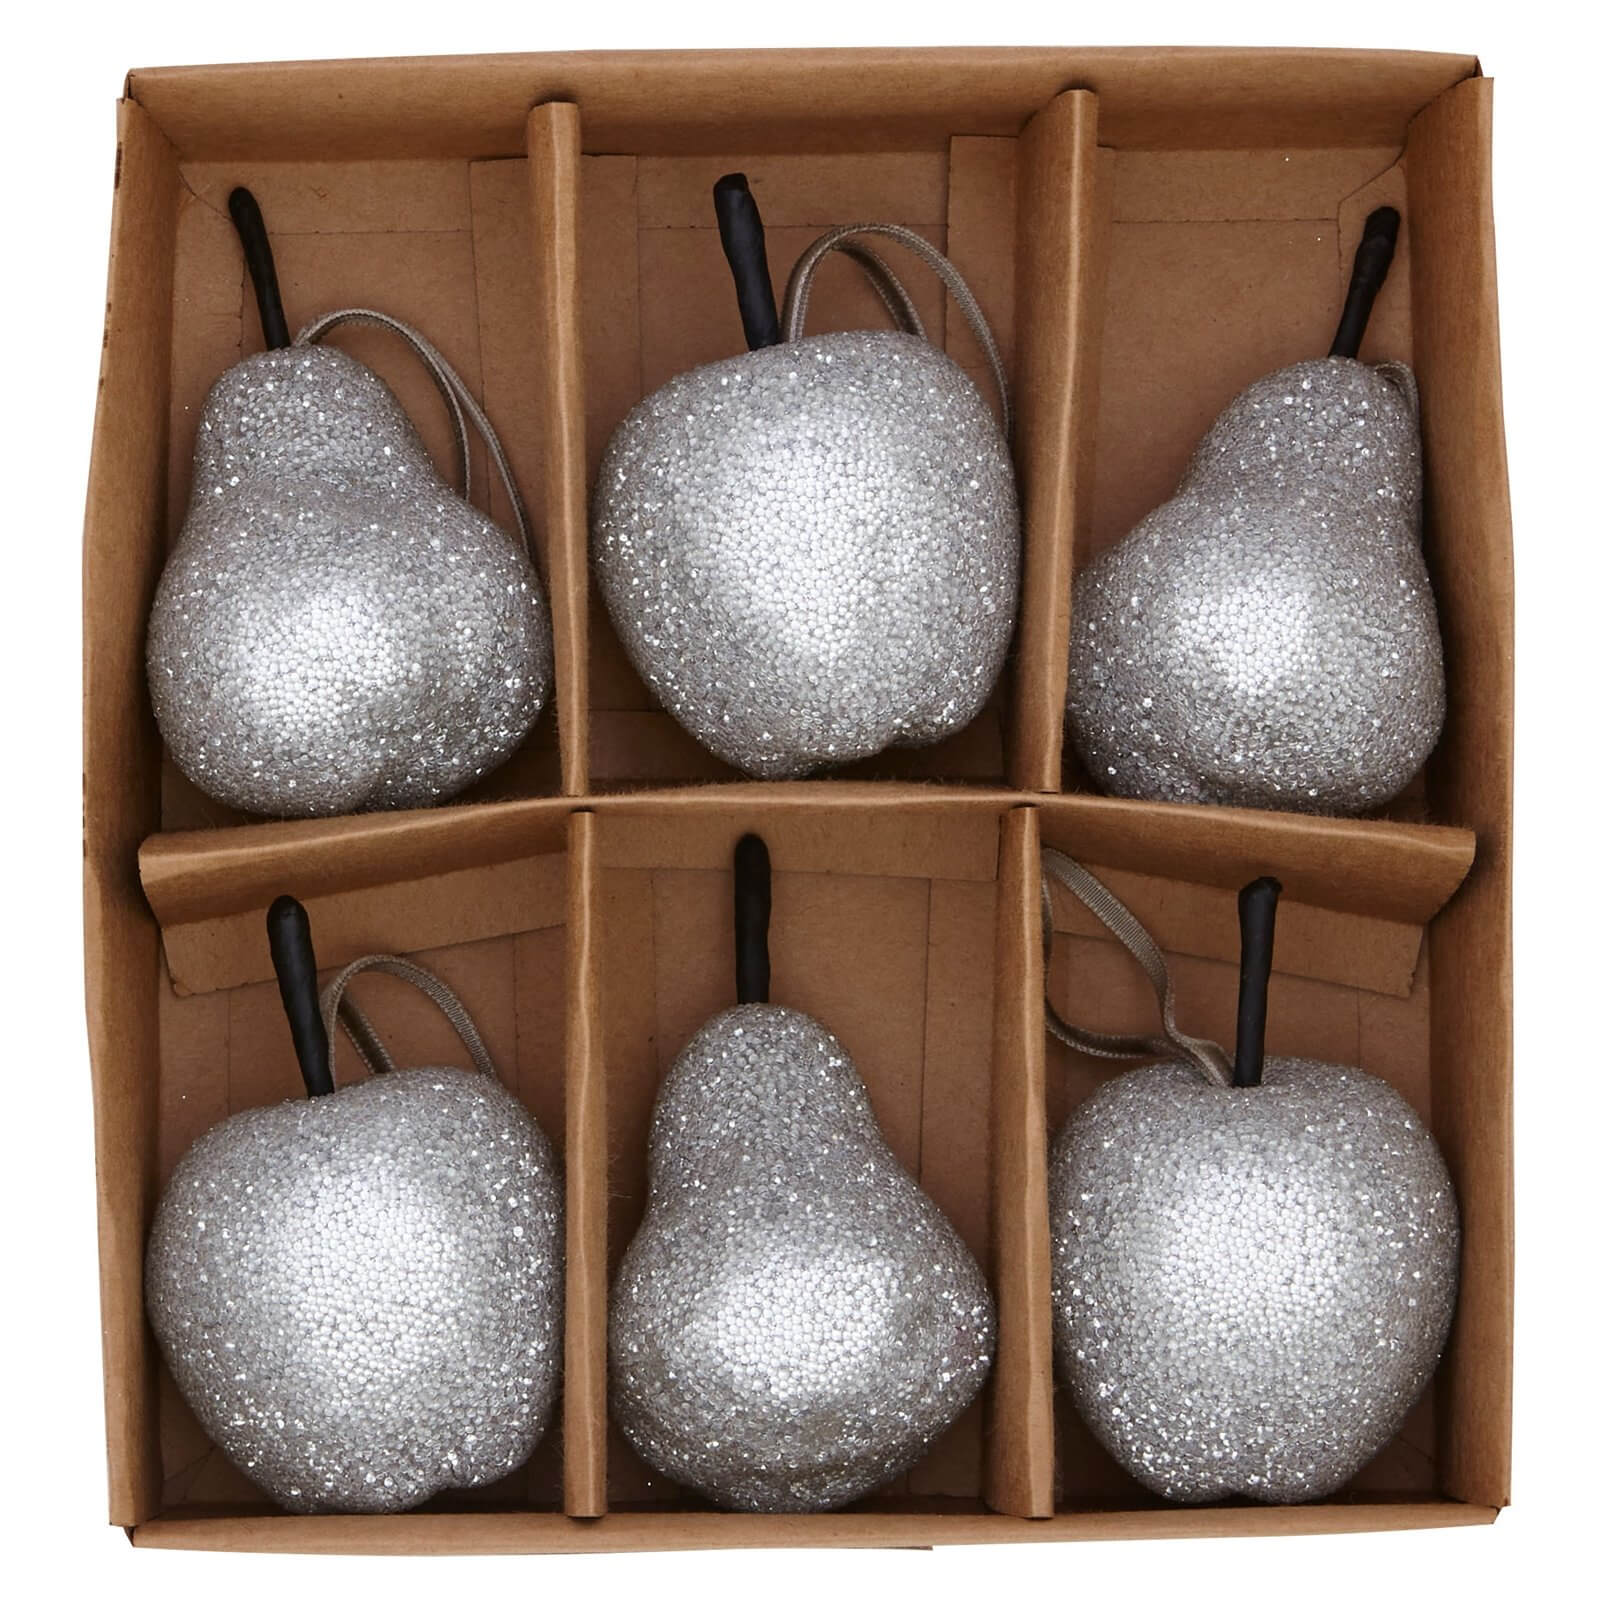 Silver Beaded Pears and Apples Christmas Tree Decorations - Pack of 6